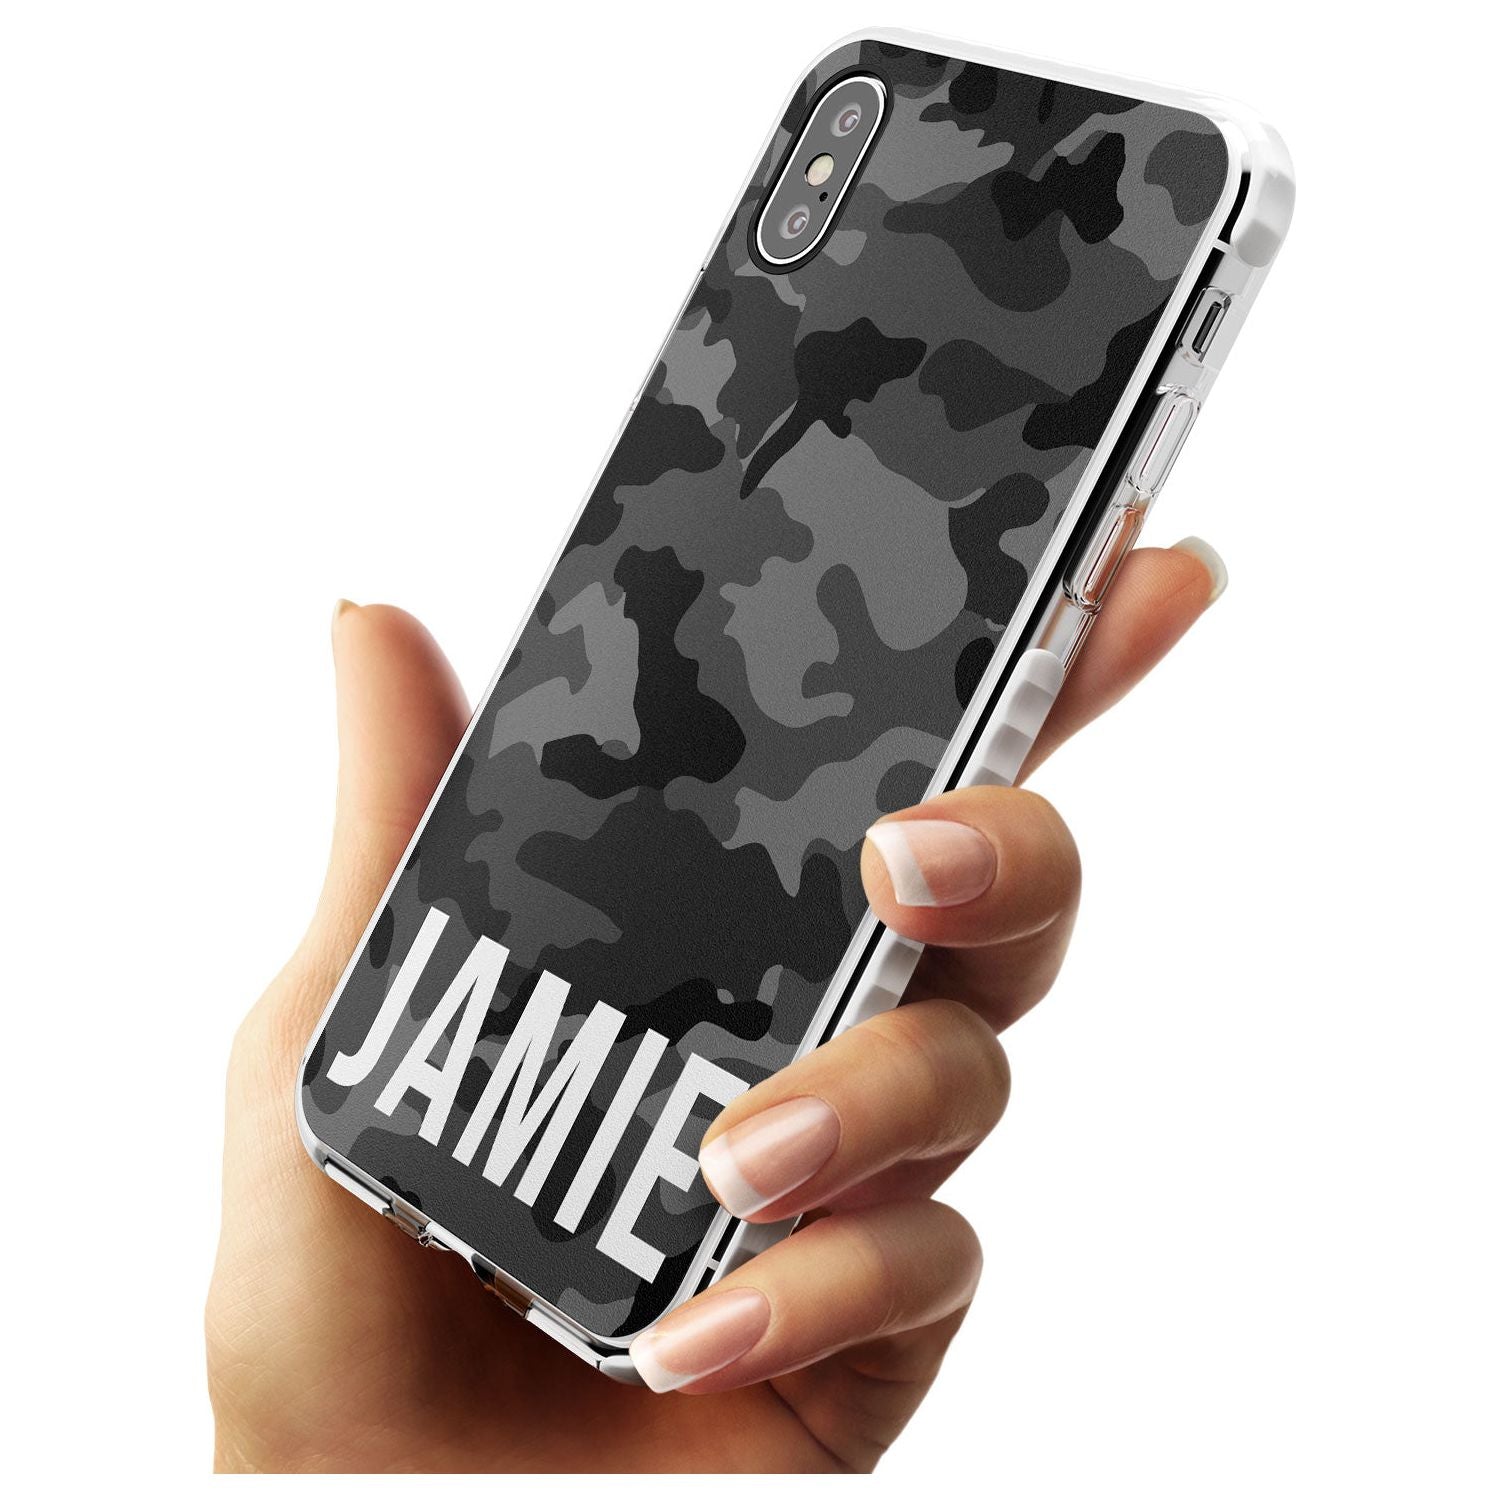 Horizontal Name Personalised Black Camouflage Impact Phone Case for iPhone X XS Max XR